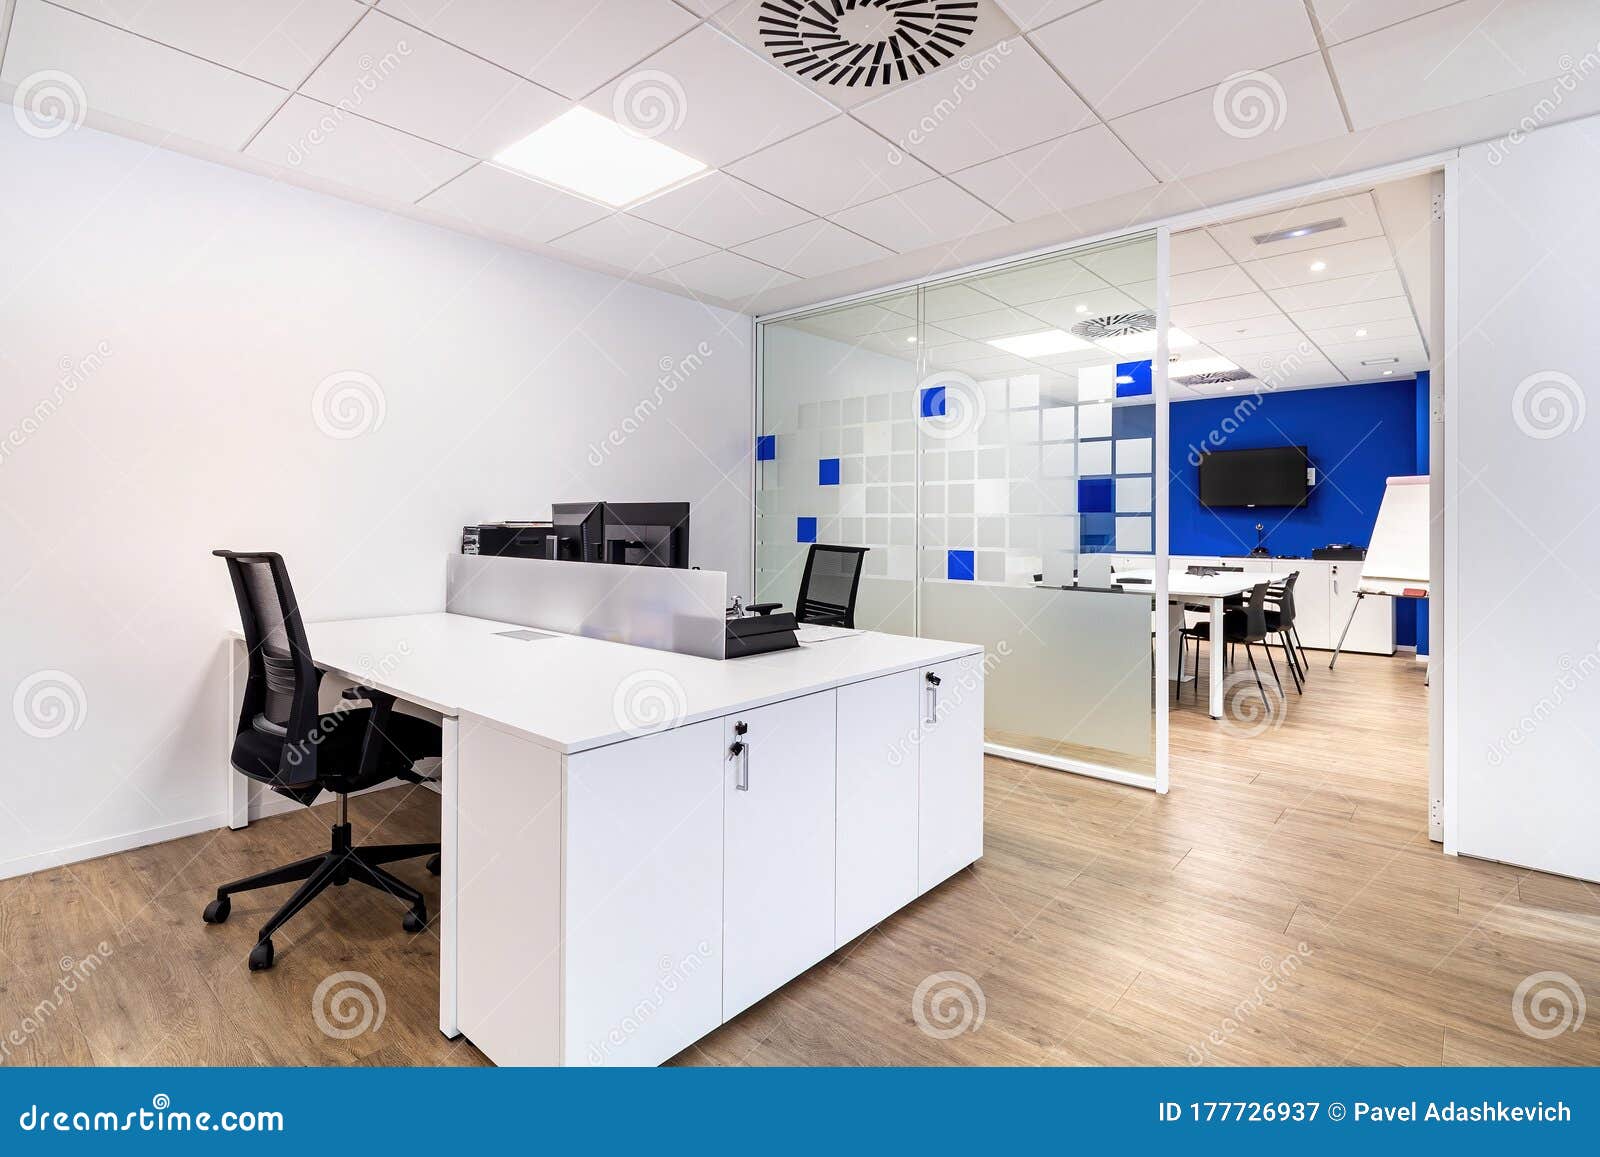 empty office with work spaces. modern office interior with blue and white walls. meeting room at the background.